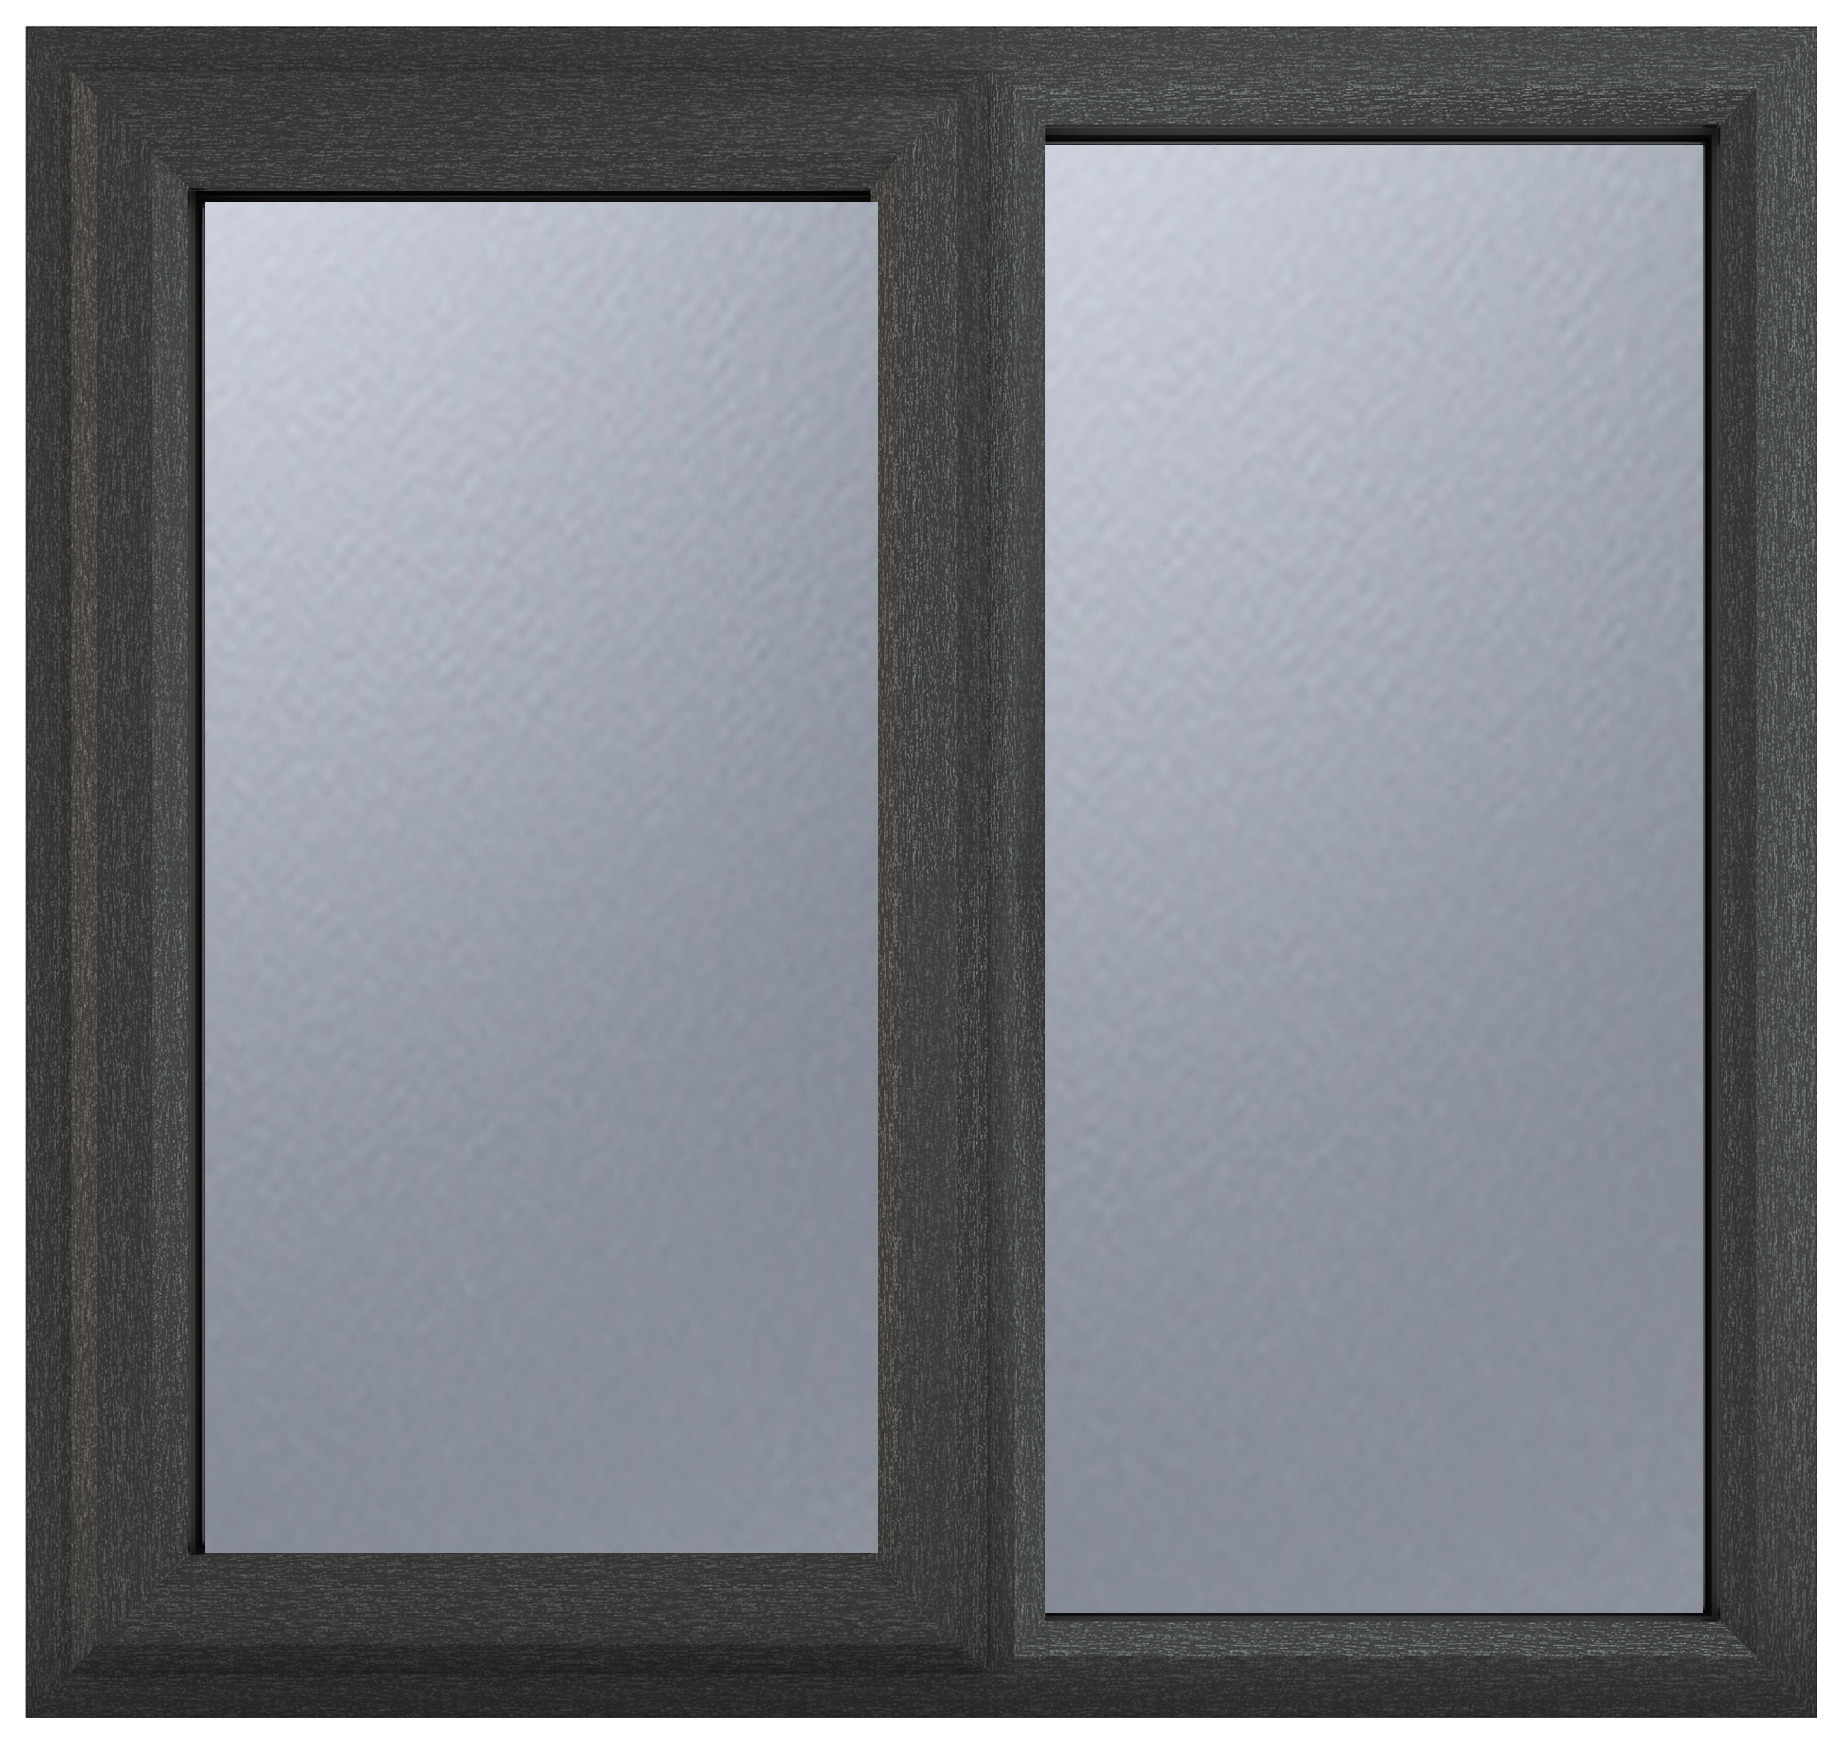 Crystal uPVC Grey Left Hung Obscure Double Glazed Fixed Light Window - 1190 x 1115mm